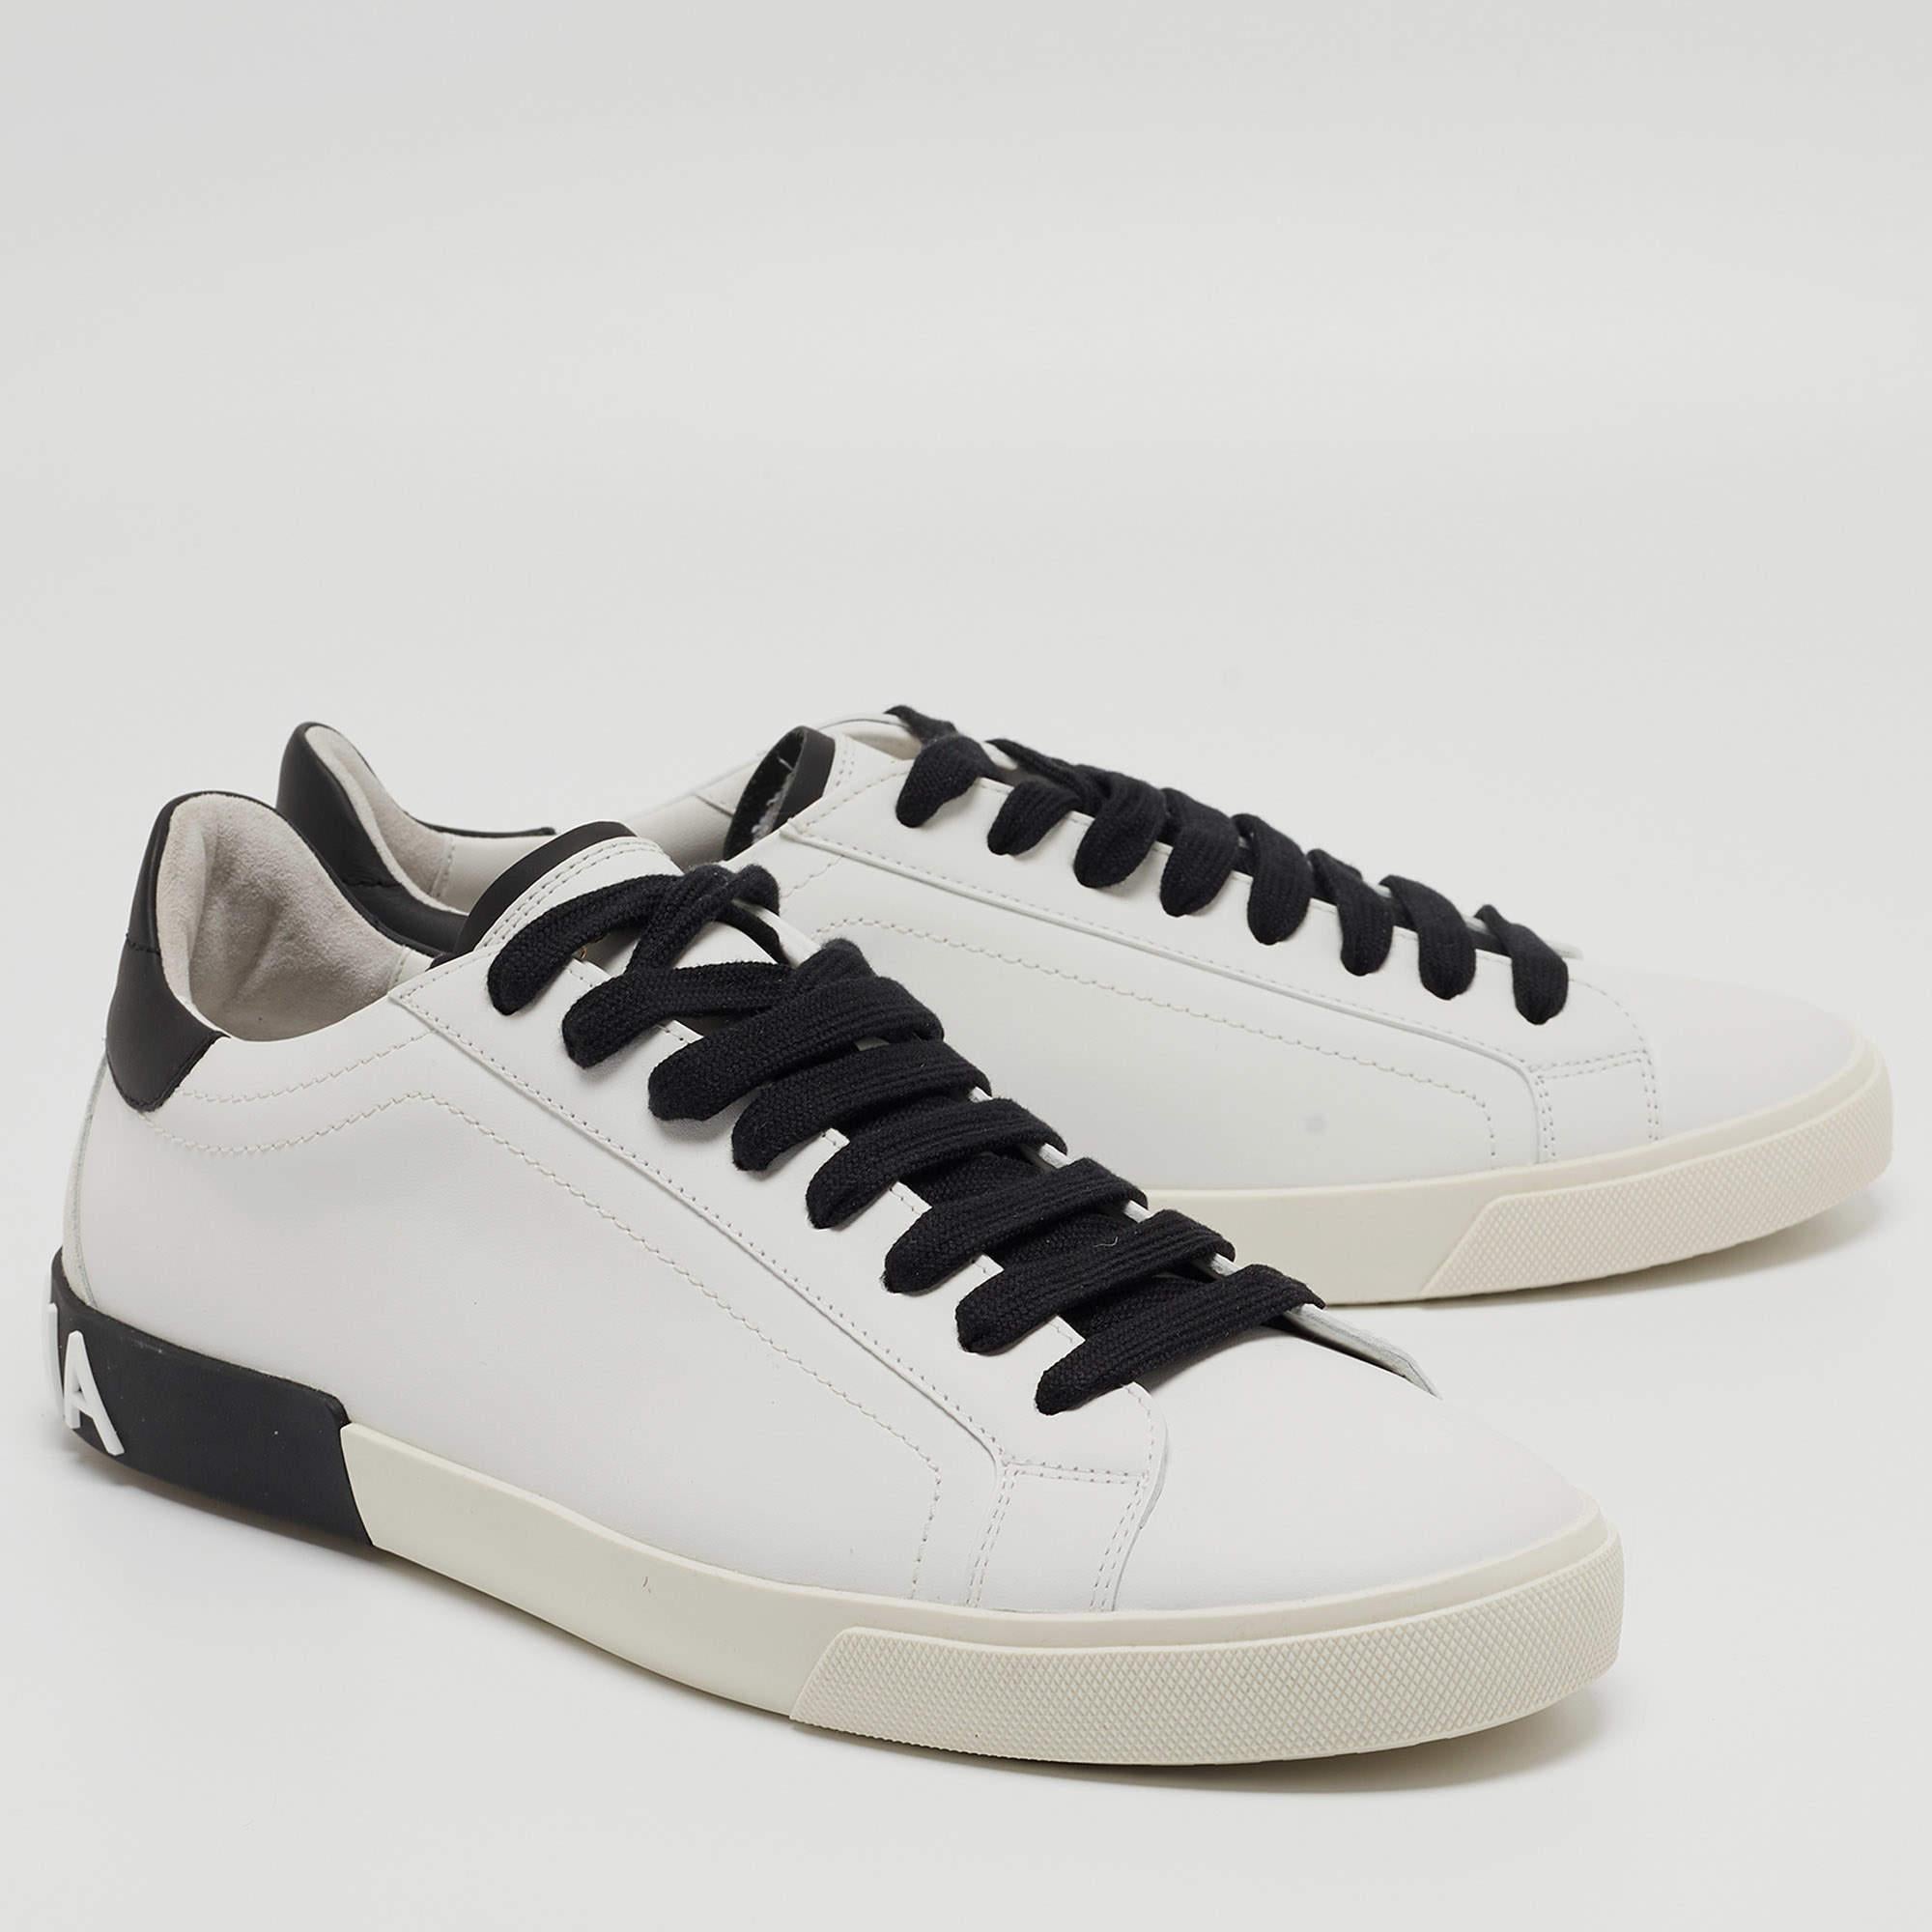 Dolce & Gabbana White/Black Leather Low Top Sneakers Size 45 2